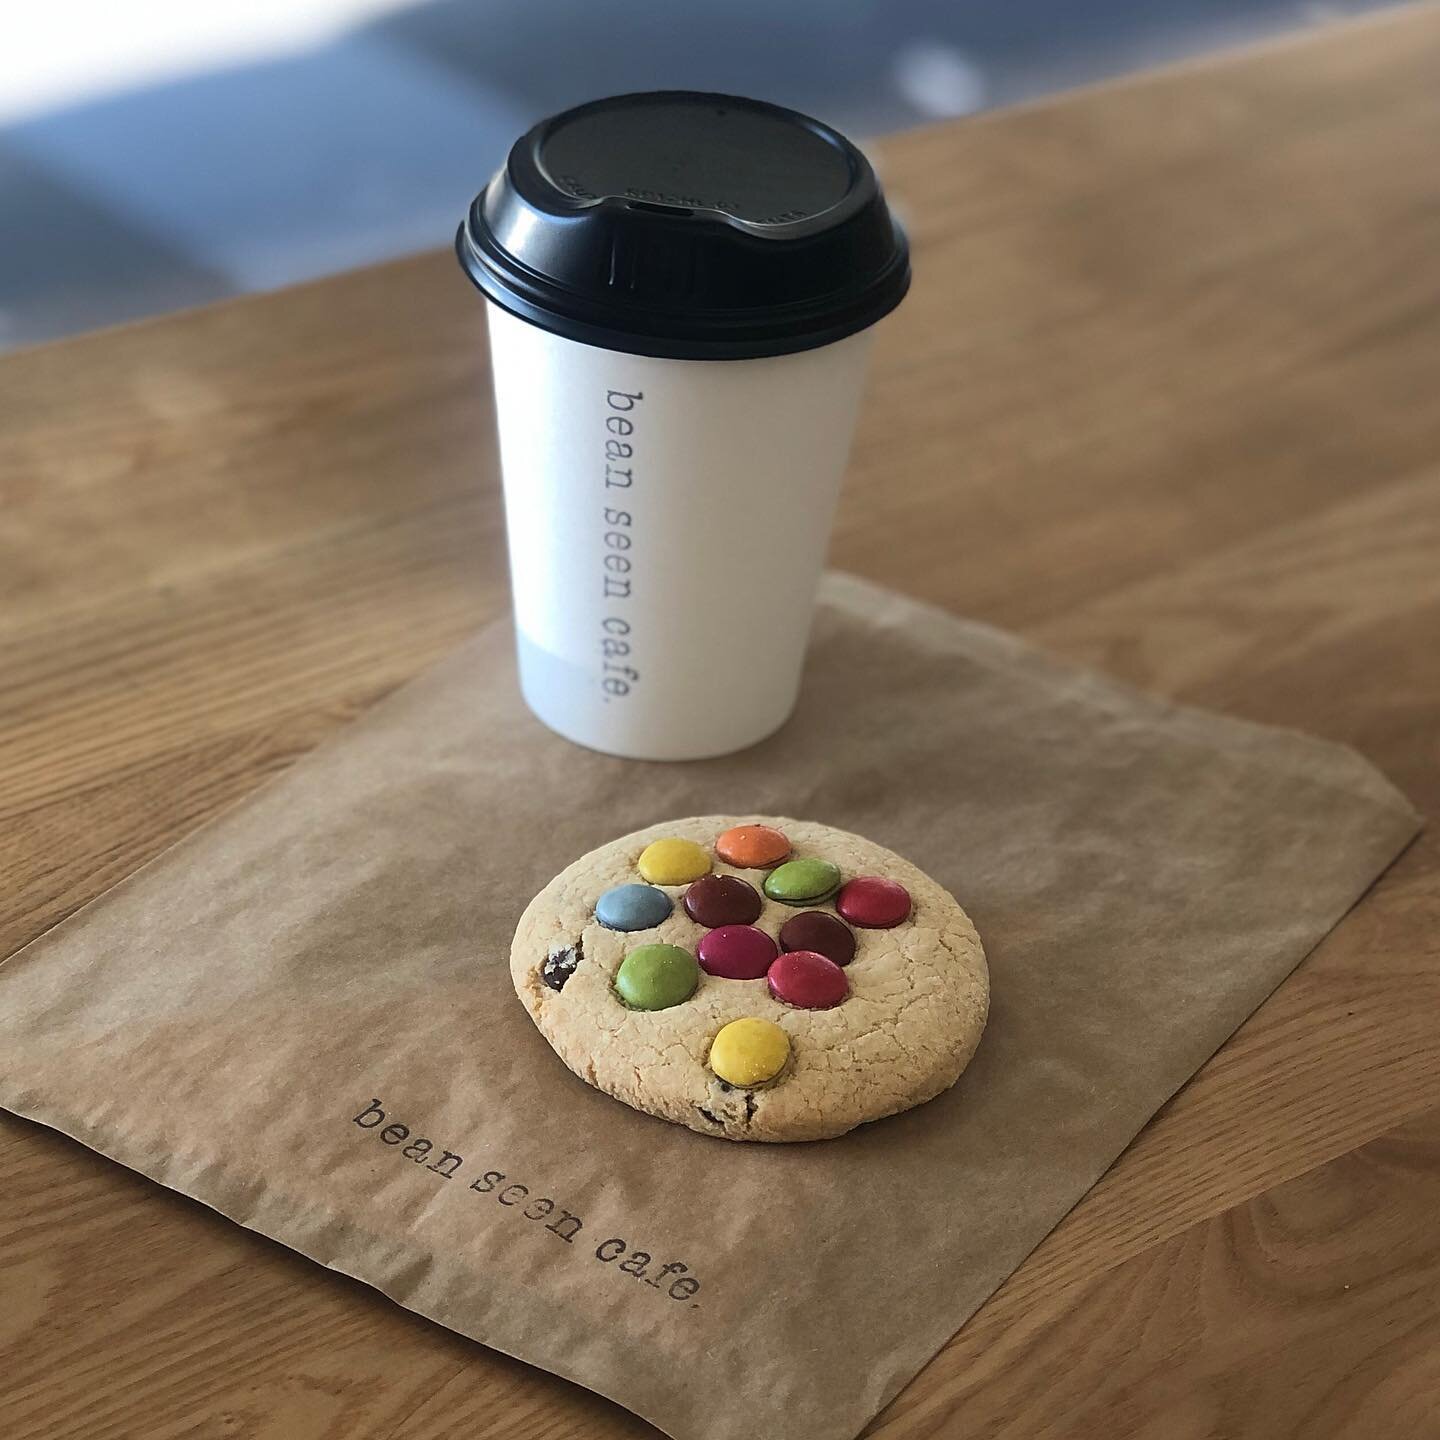 One smart cookie @beanseencafe 🍪